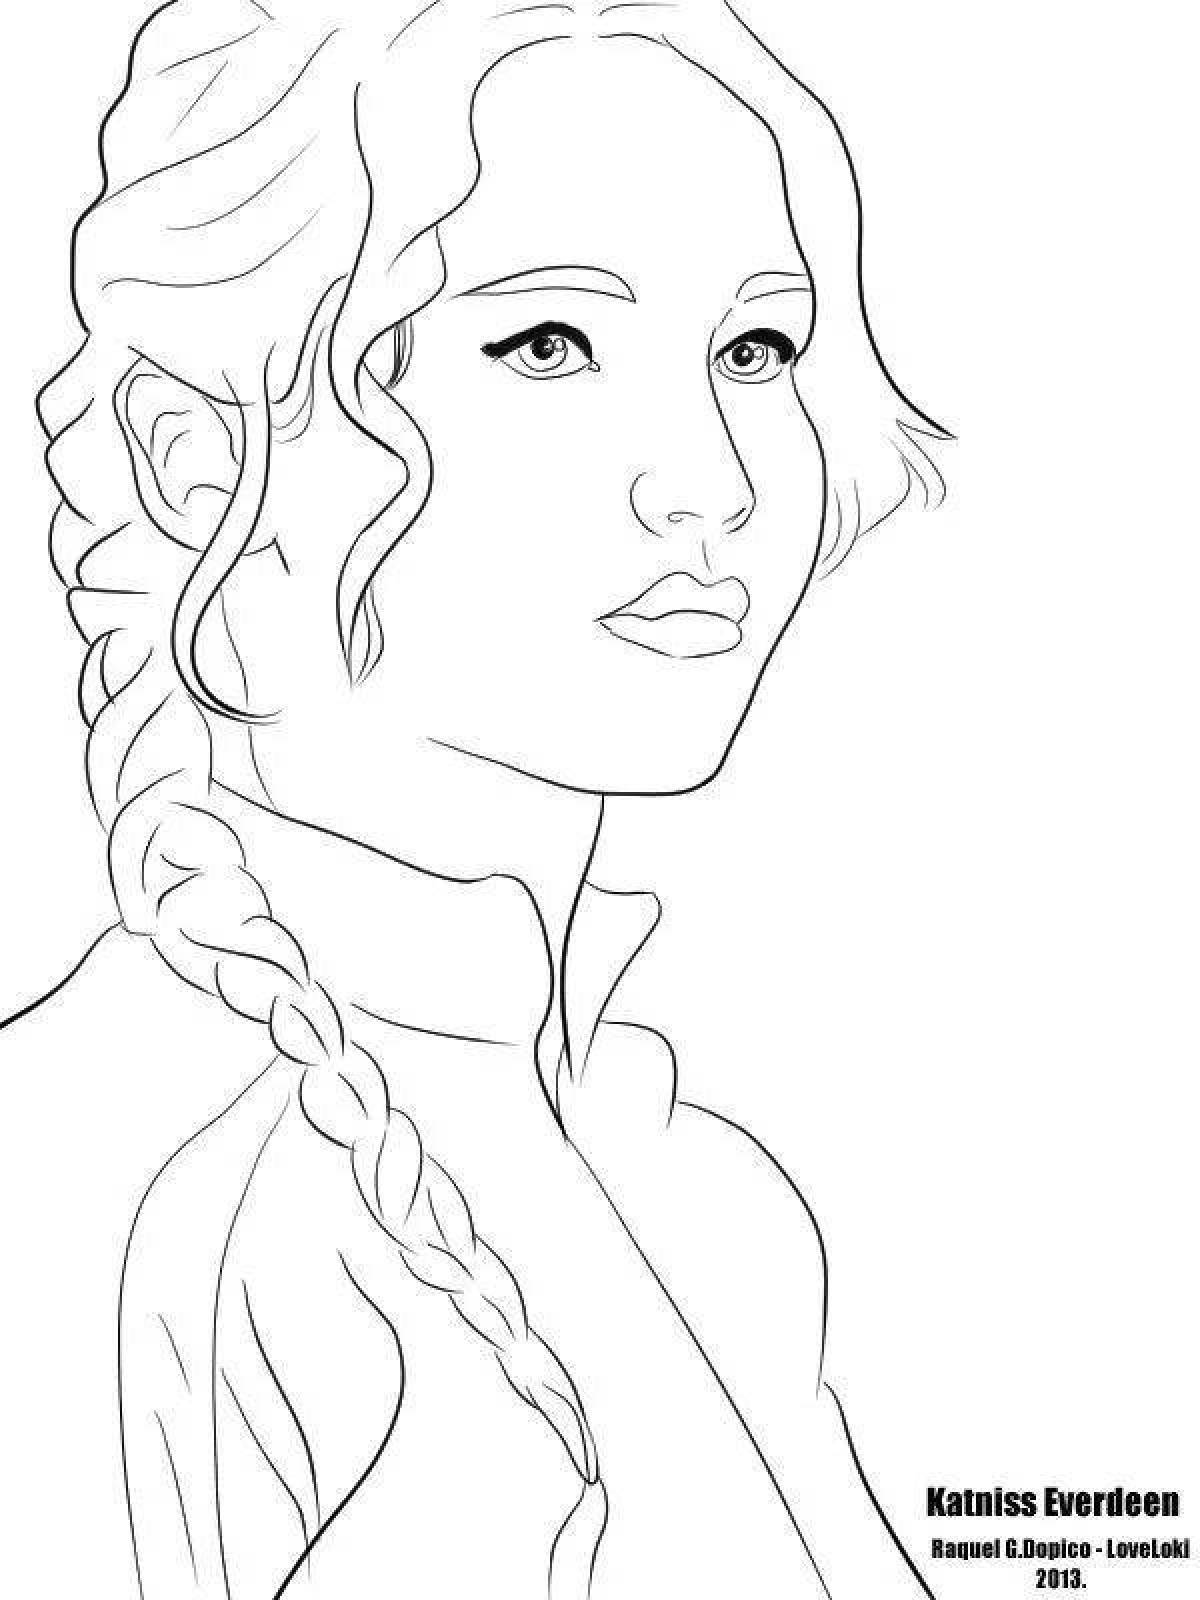 Majestic hunger games coloring book